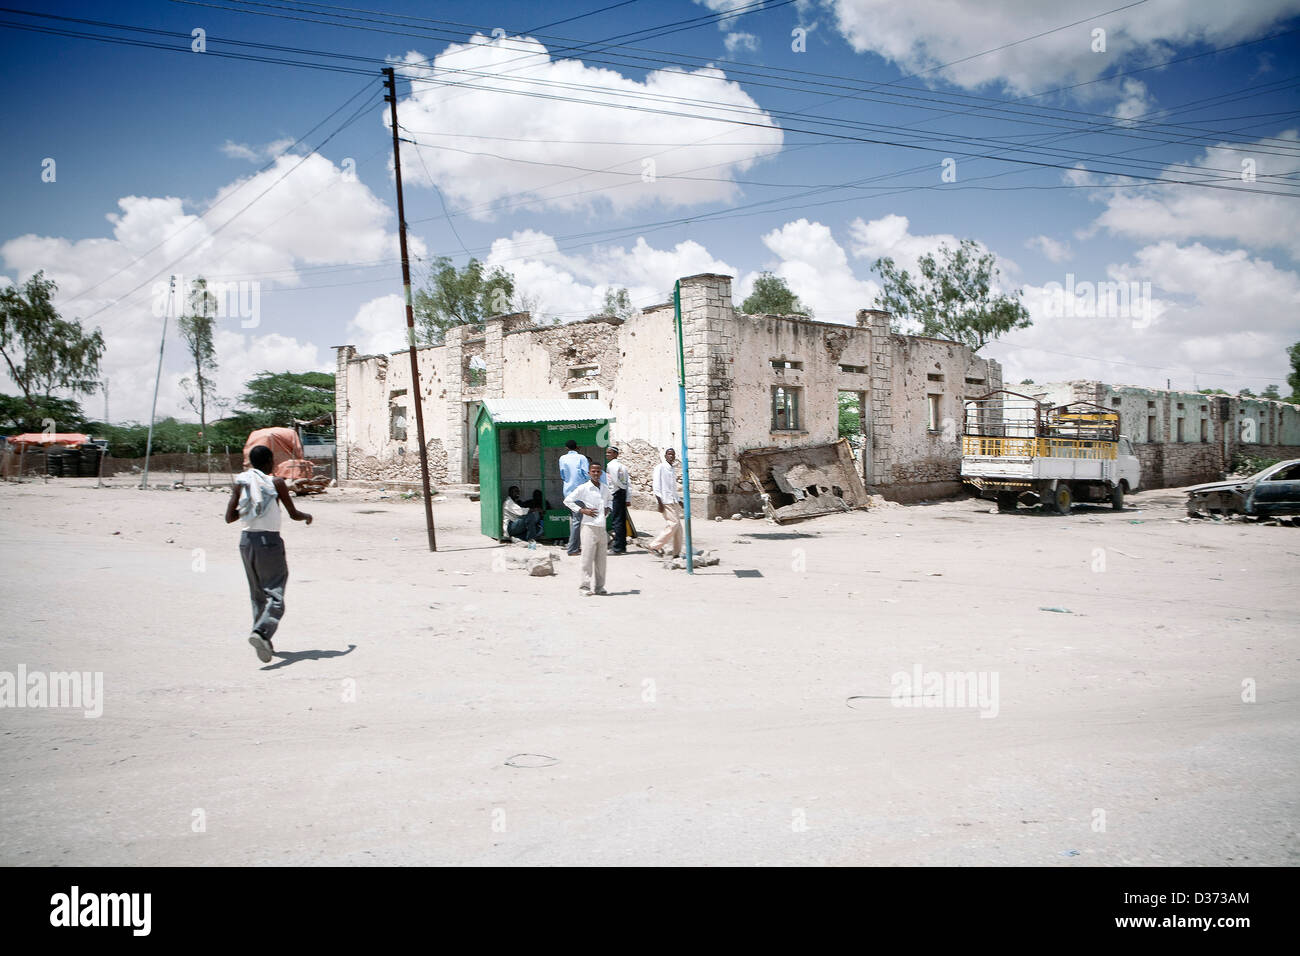 War-torn buildings in a street in Hergeisa, the semi-autonomous capital of Somaliland. Stock Photo